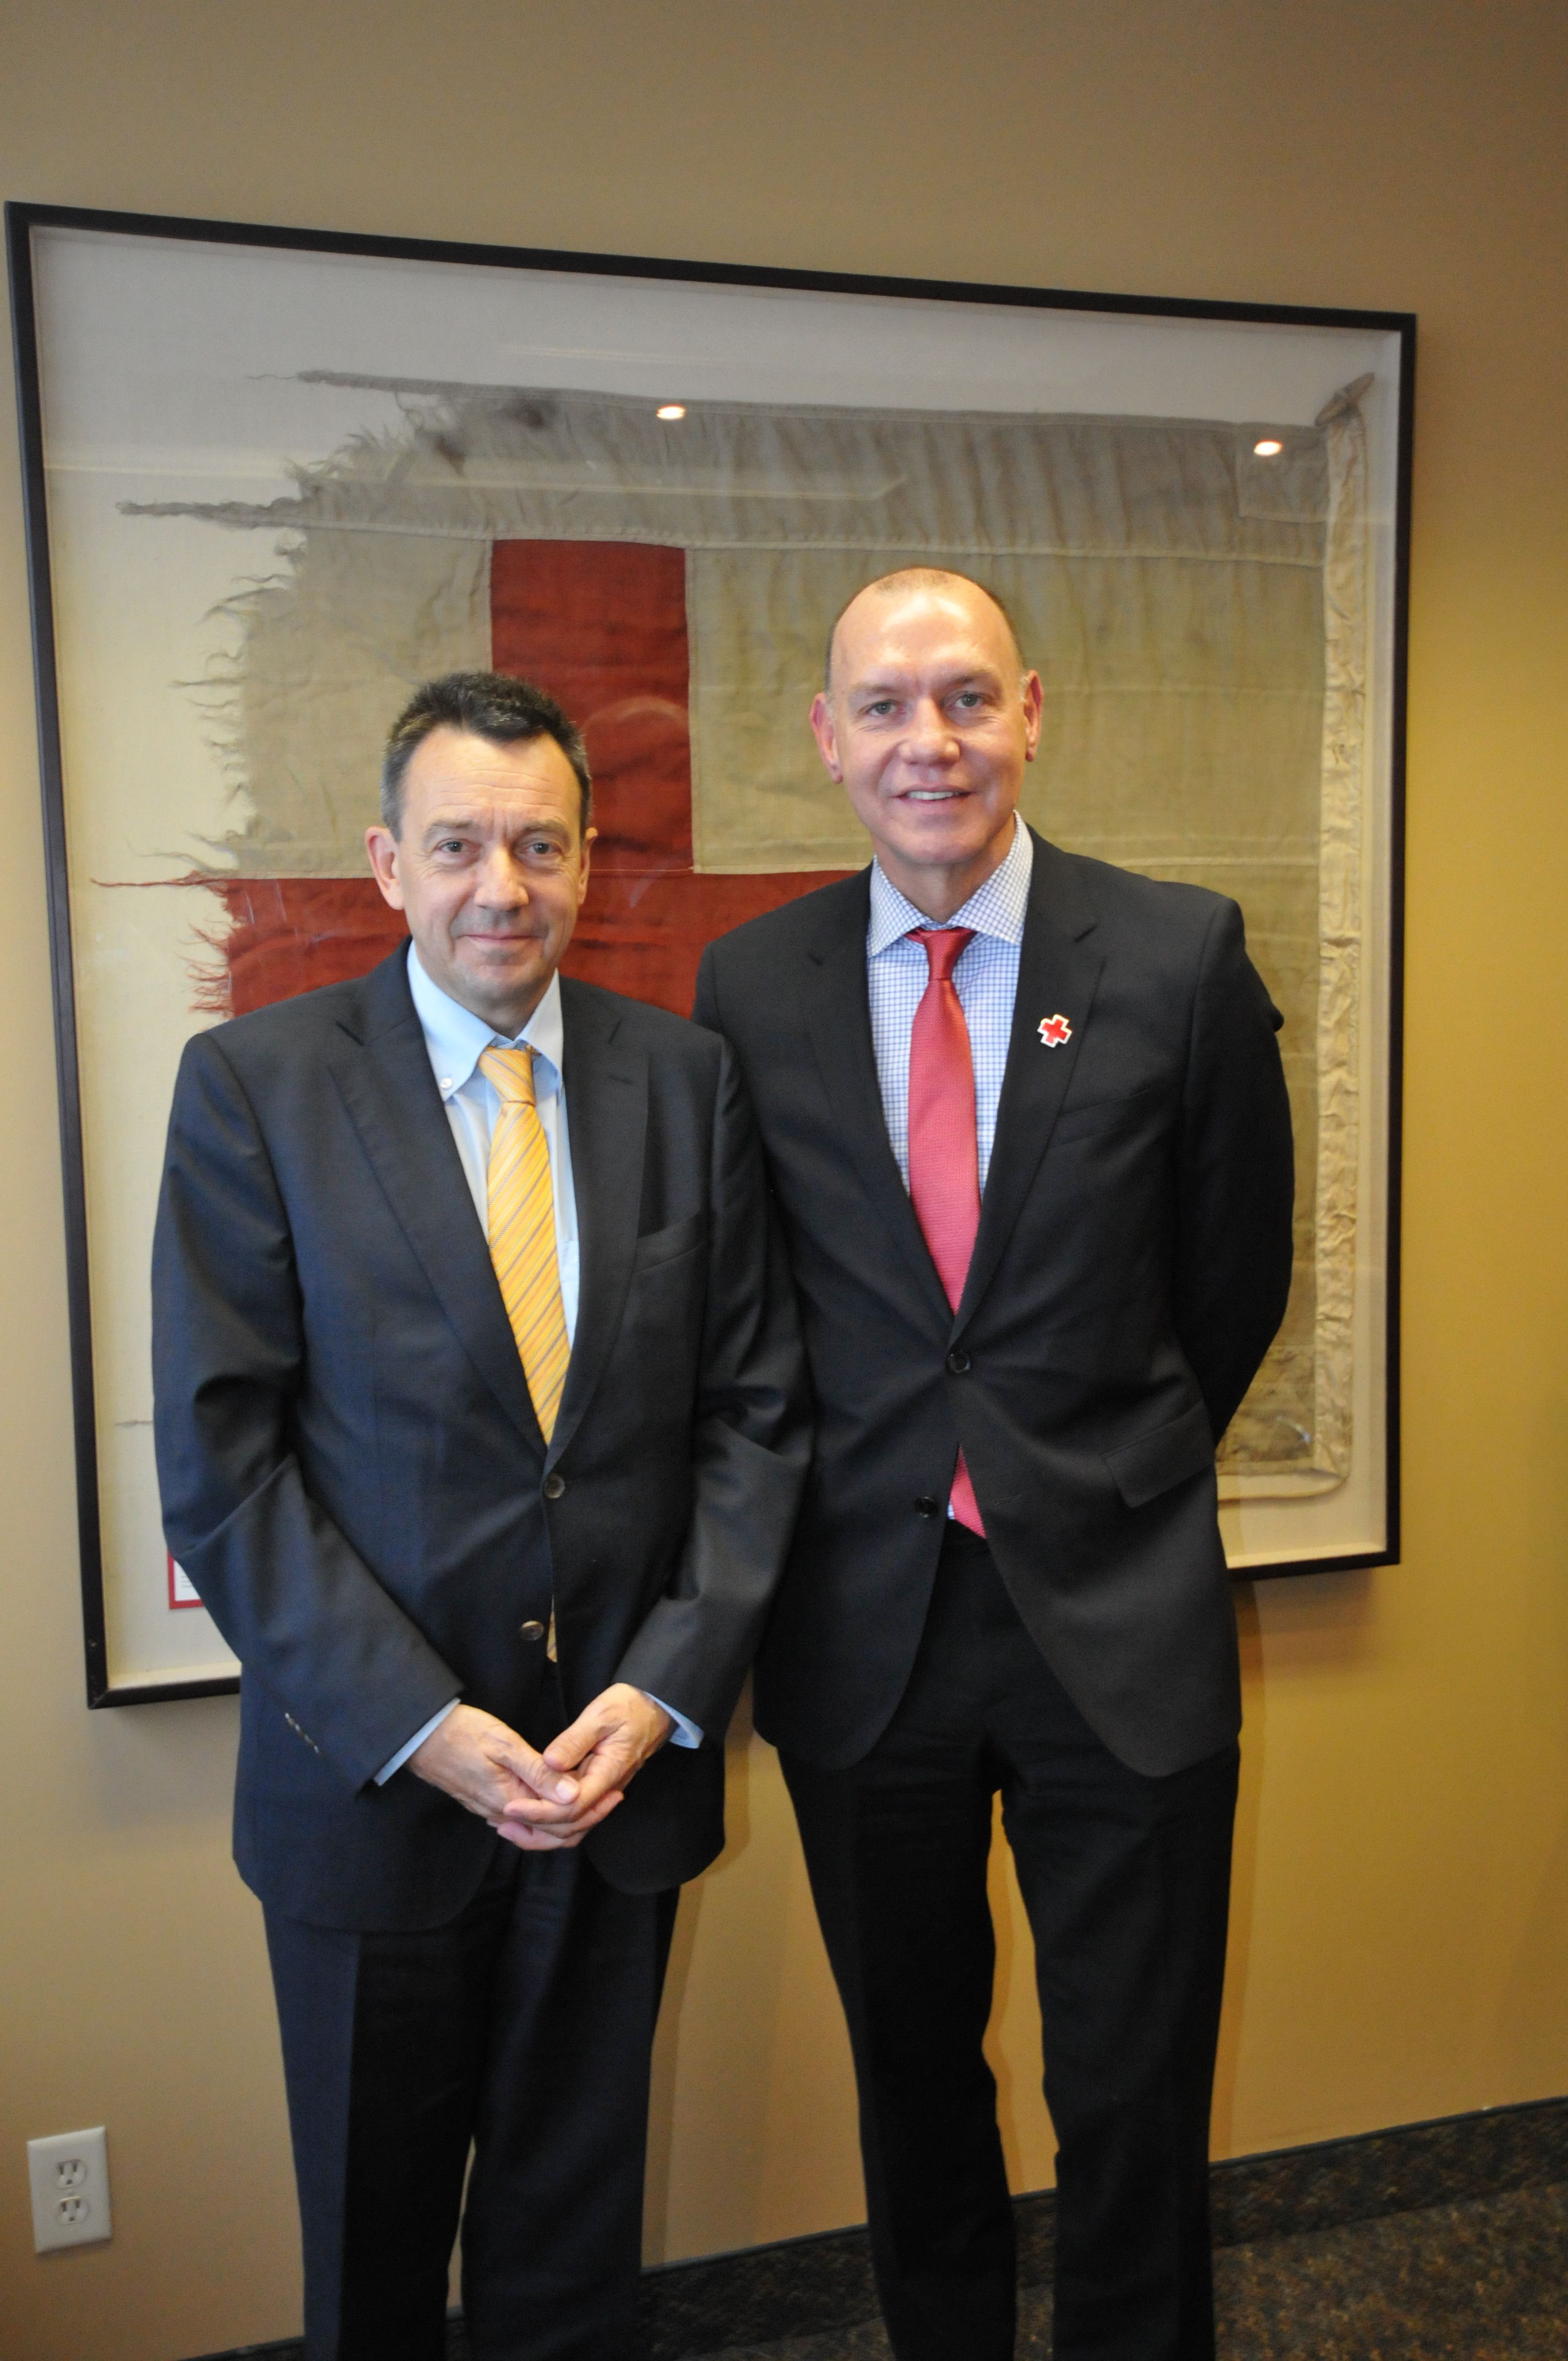 Peter Maurer, President of the International Committee of the Red Cross, pictured above with Conrad Sauve, Secretary General and CEO of the Canadian Red Cross